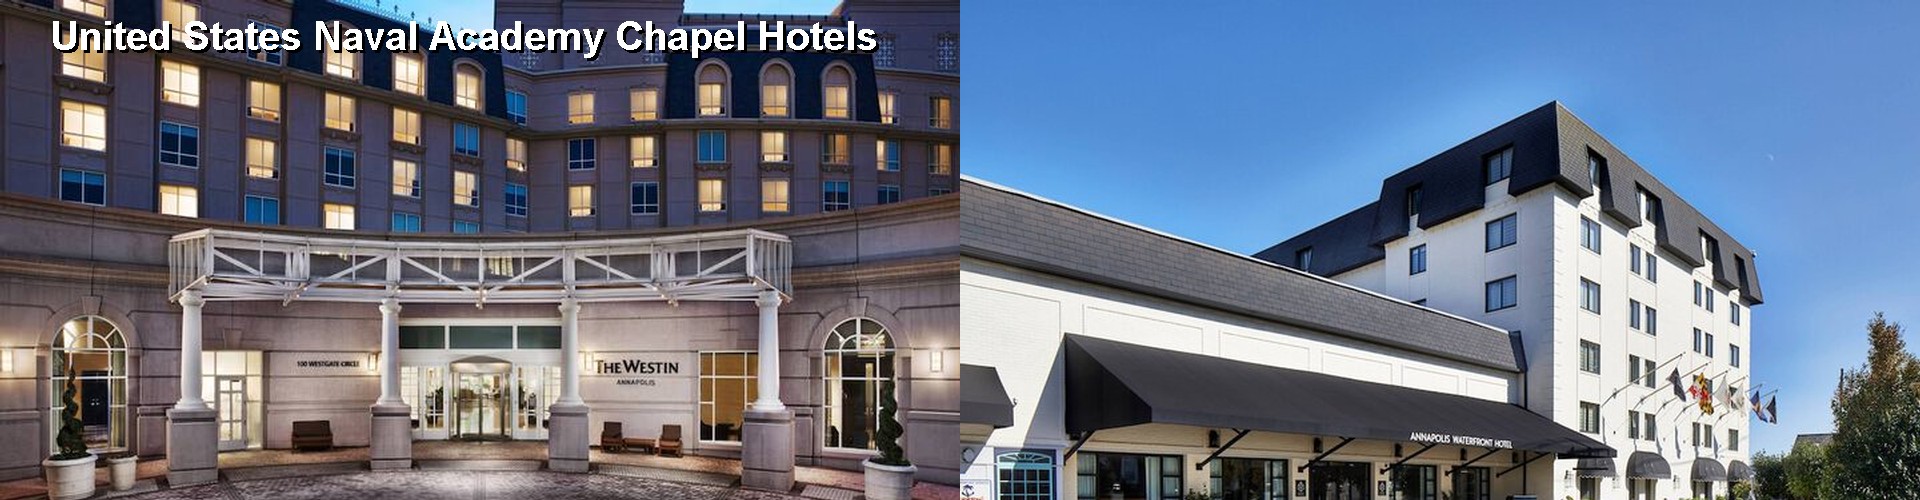 5 Best Hotels near United States Naval Academy Chapel